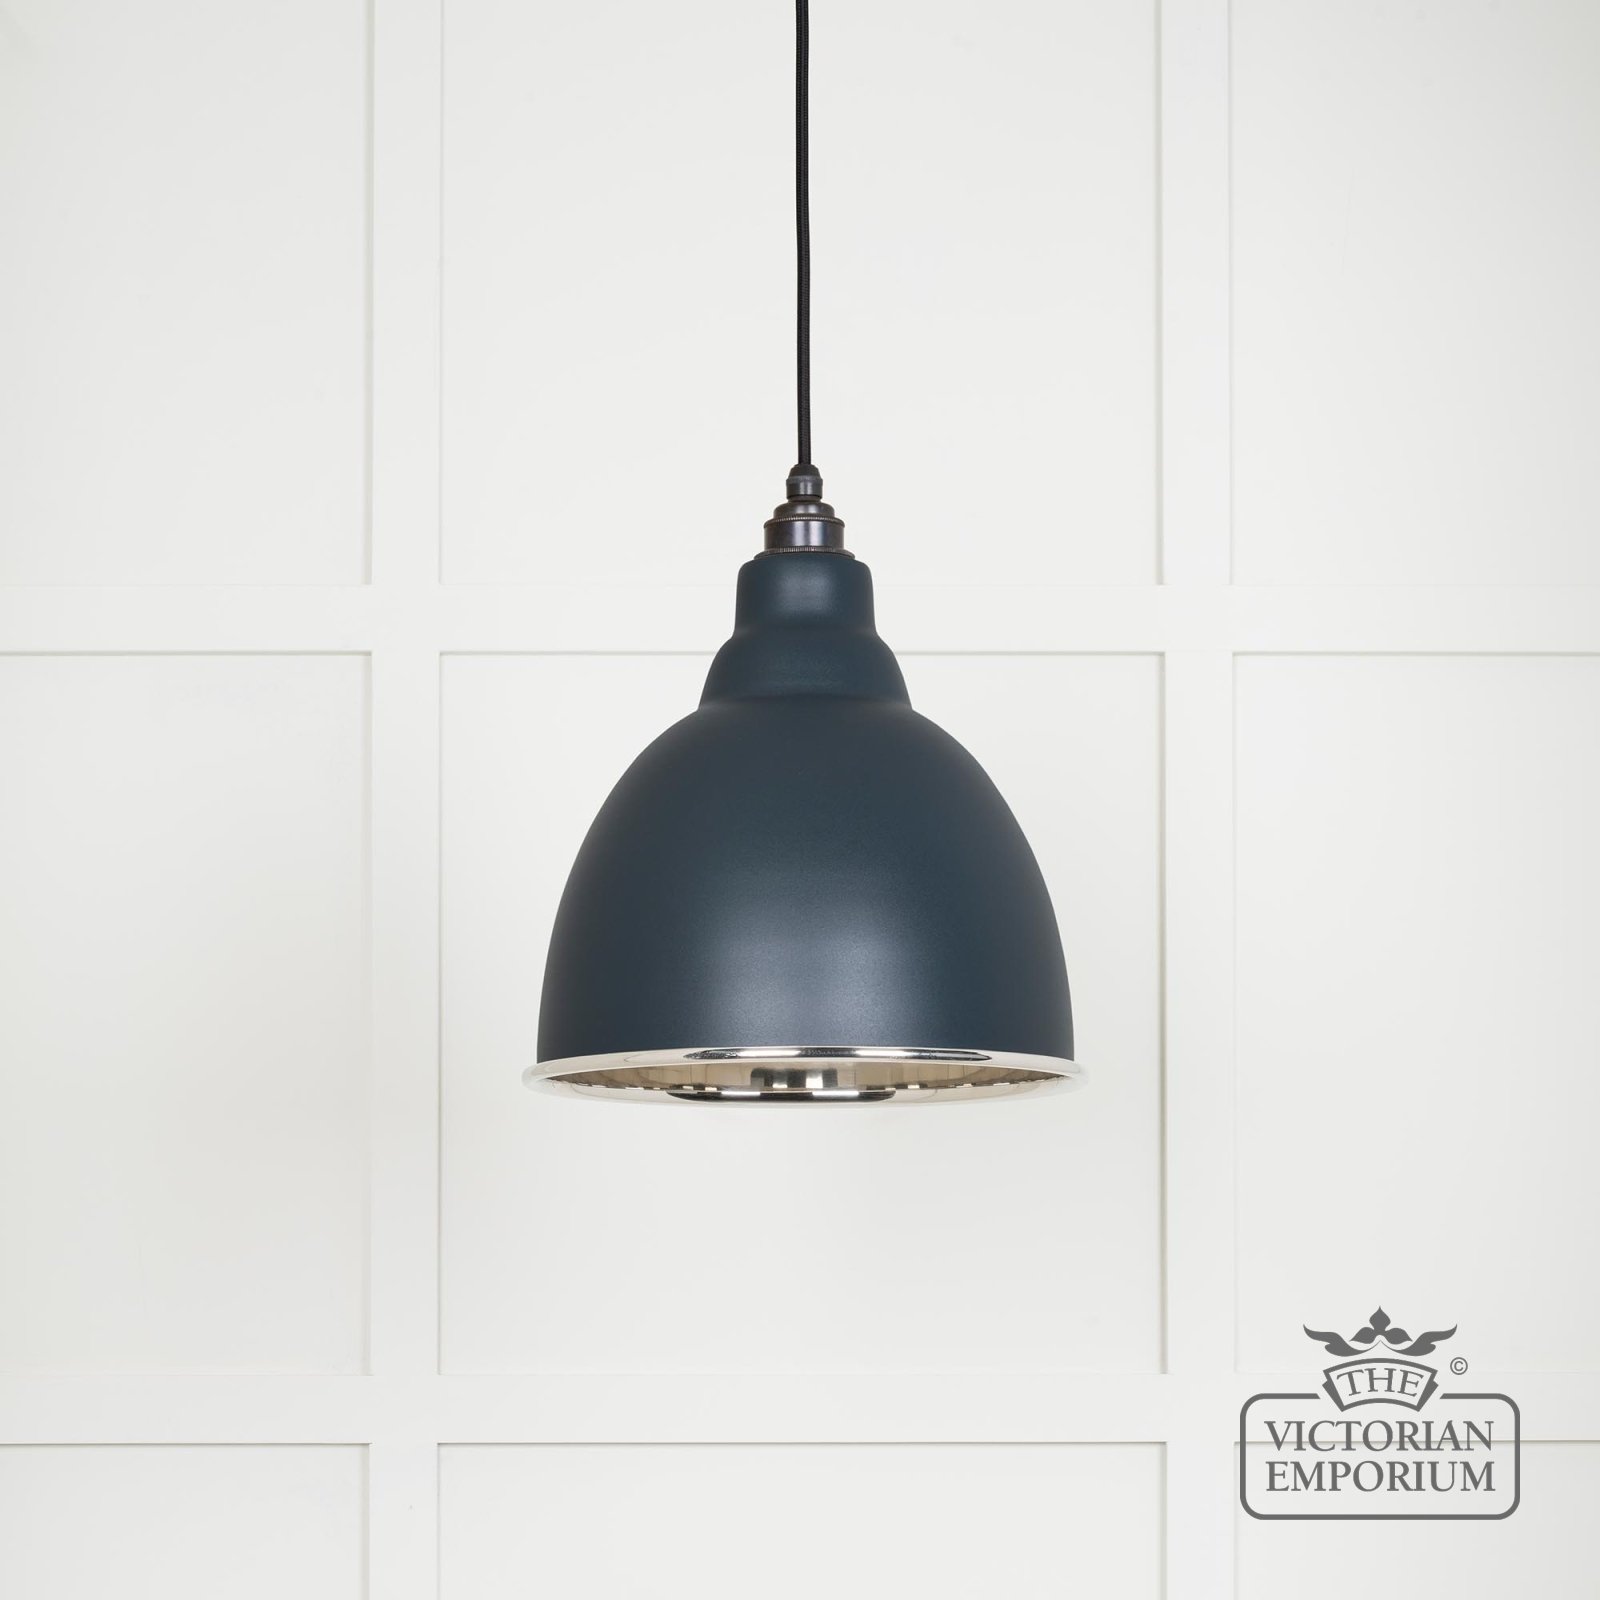 Brindle pendant light in Soot with nickel interior